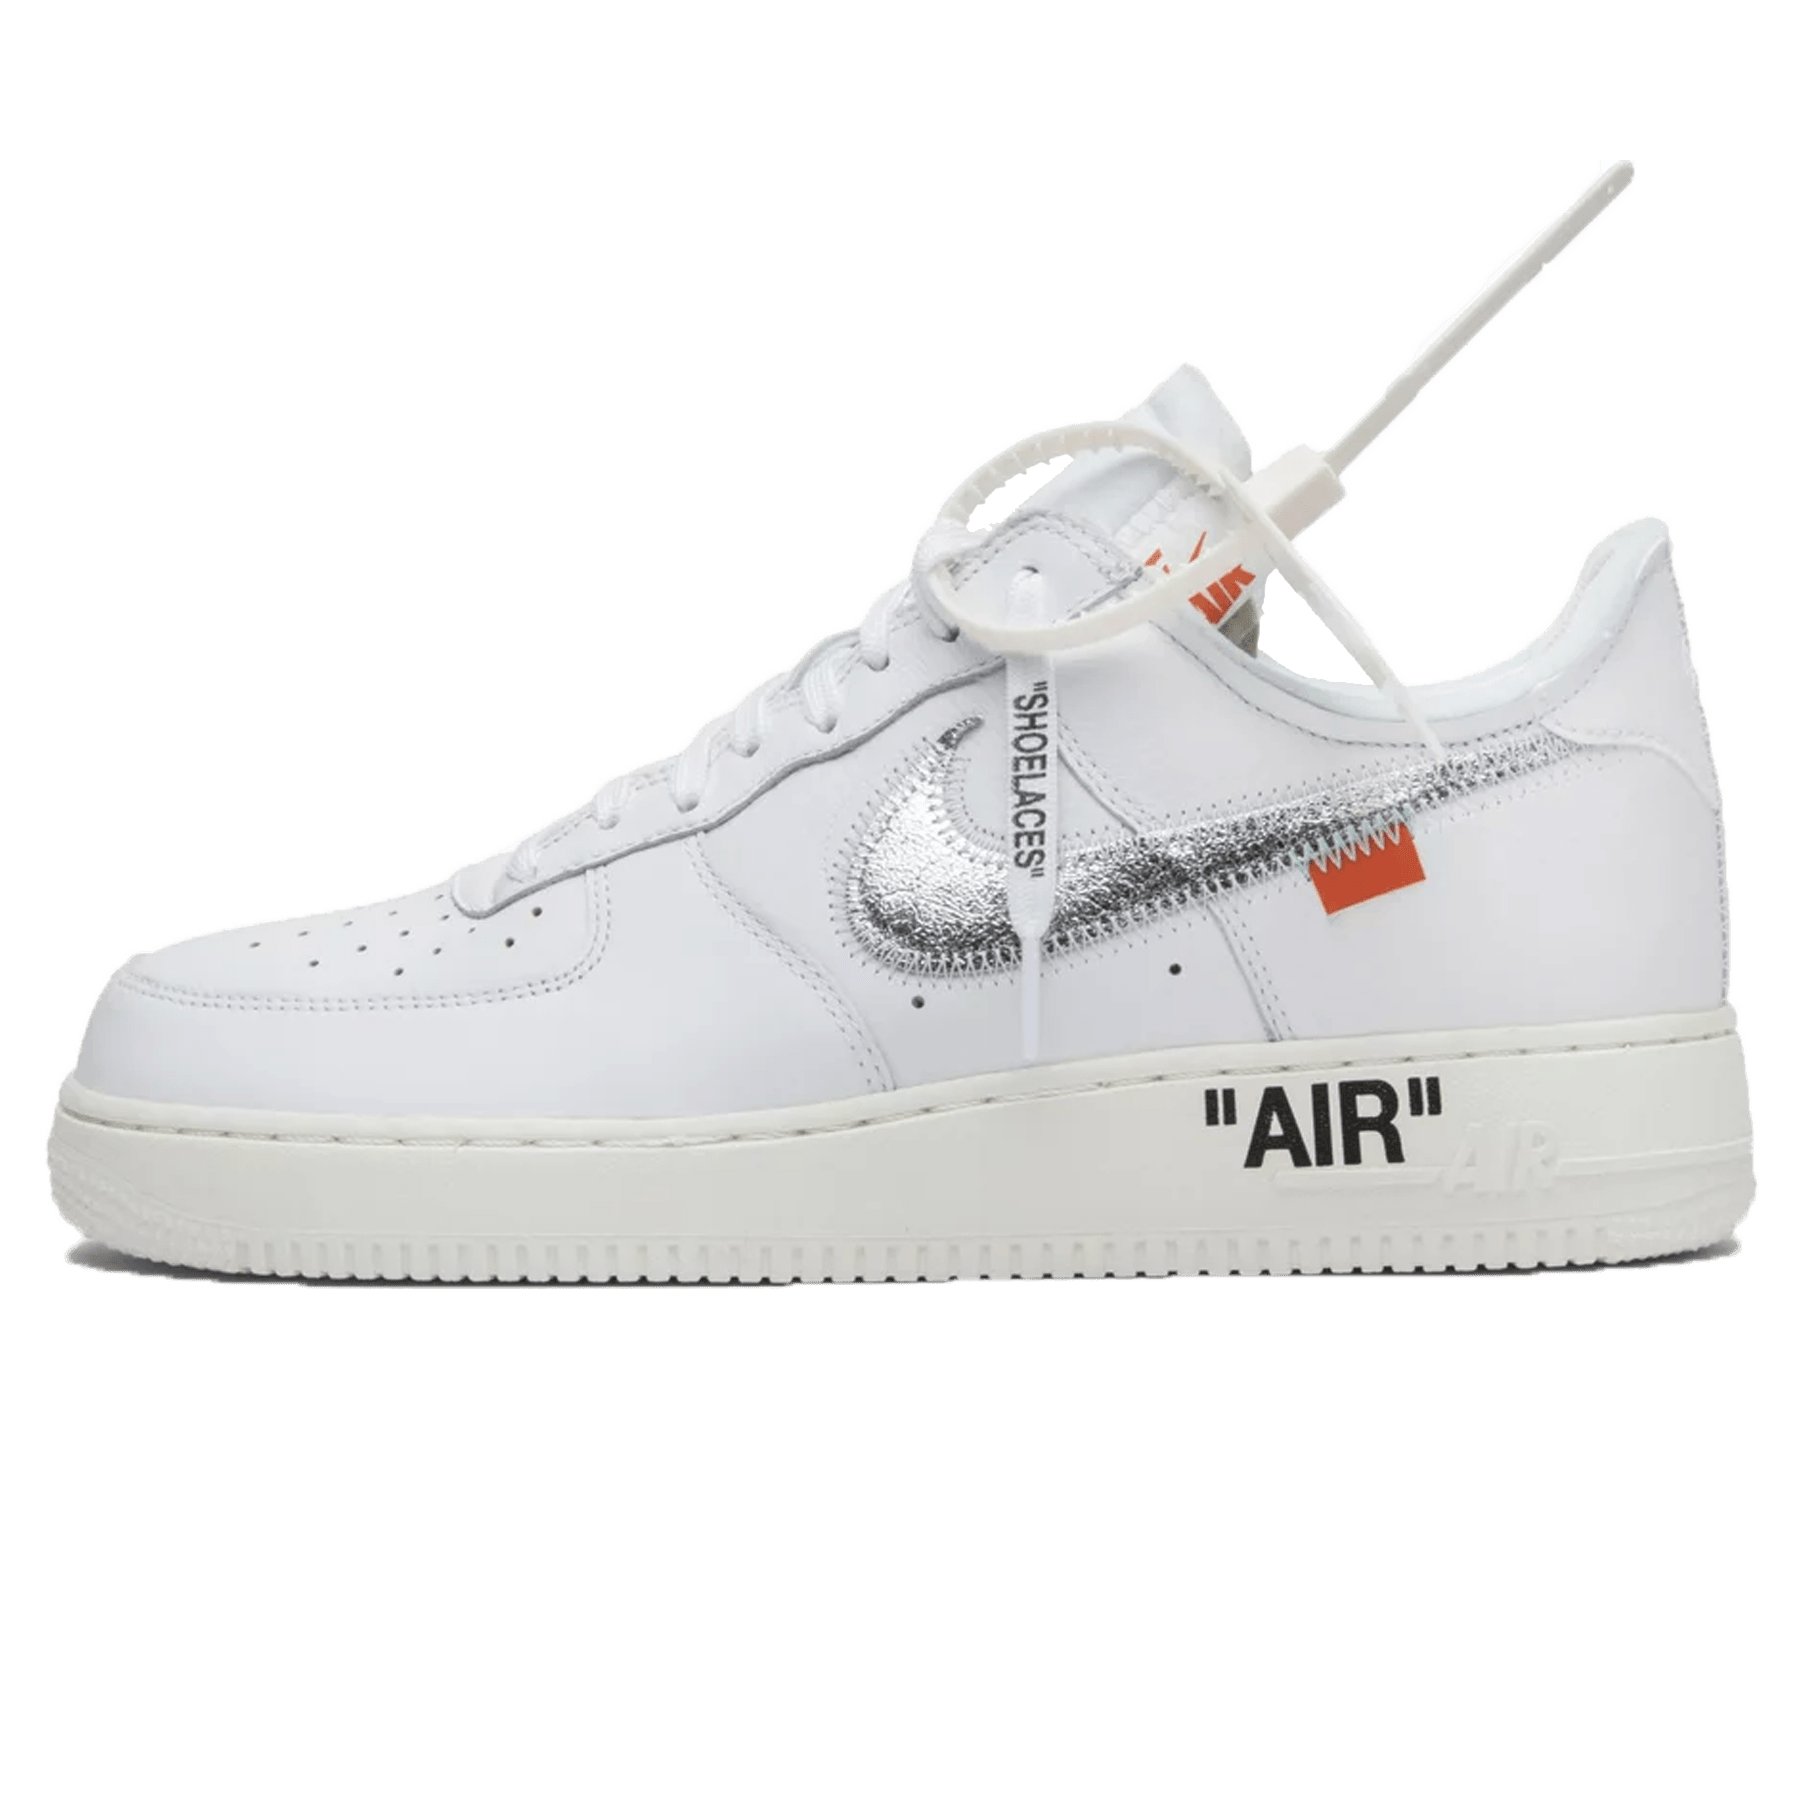 OFF-WHITE x Air Force 1 'ComplexCon Exclusive' - AO4297 100